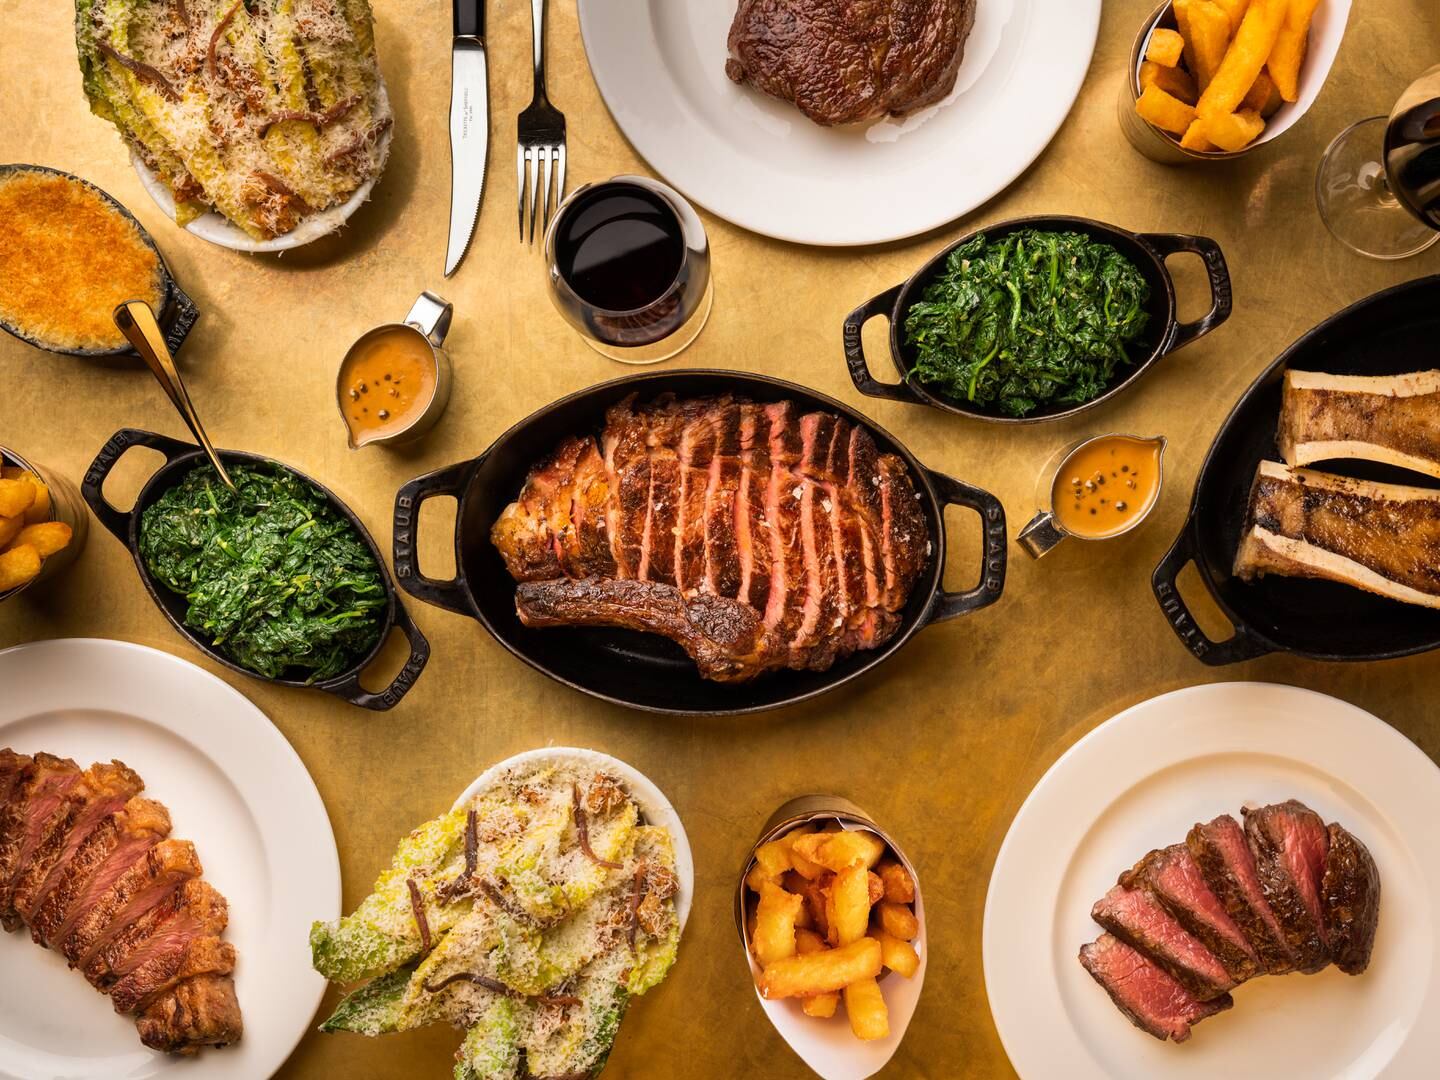 Seafood and meat options aside, the restaurant serves starters and sides including mac and cheese, triple-cooked chips and lemon garlic spinach. Photo: Hawksmoor Group